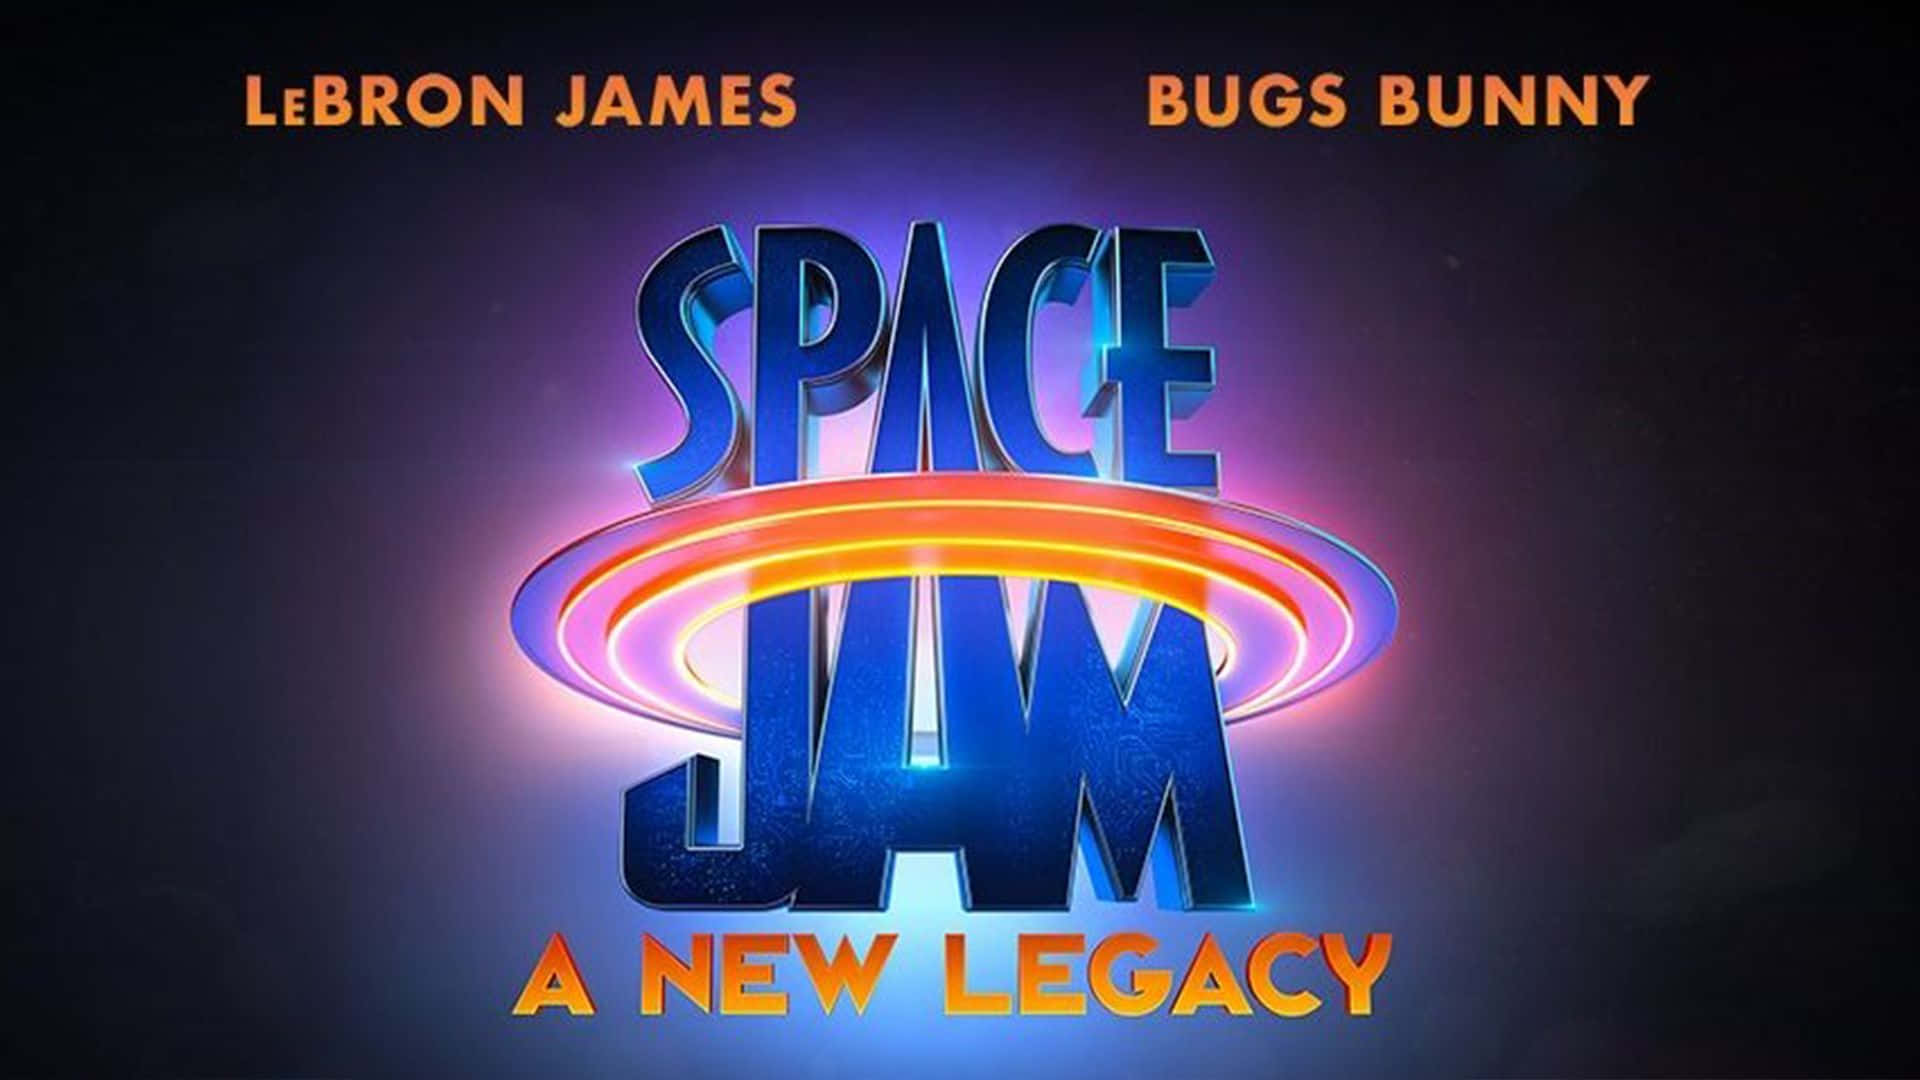 Take a break from your day and experience the incredible adventure with Space Jam.